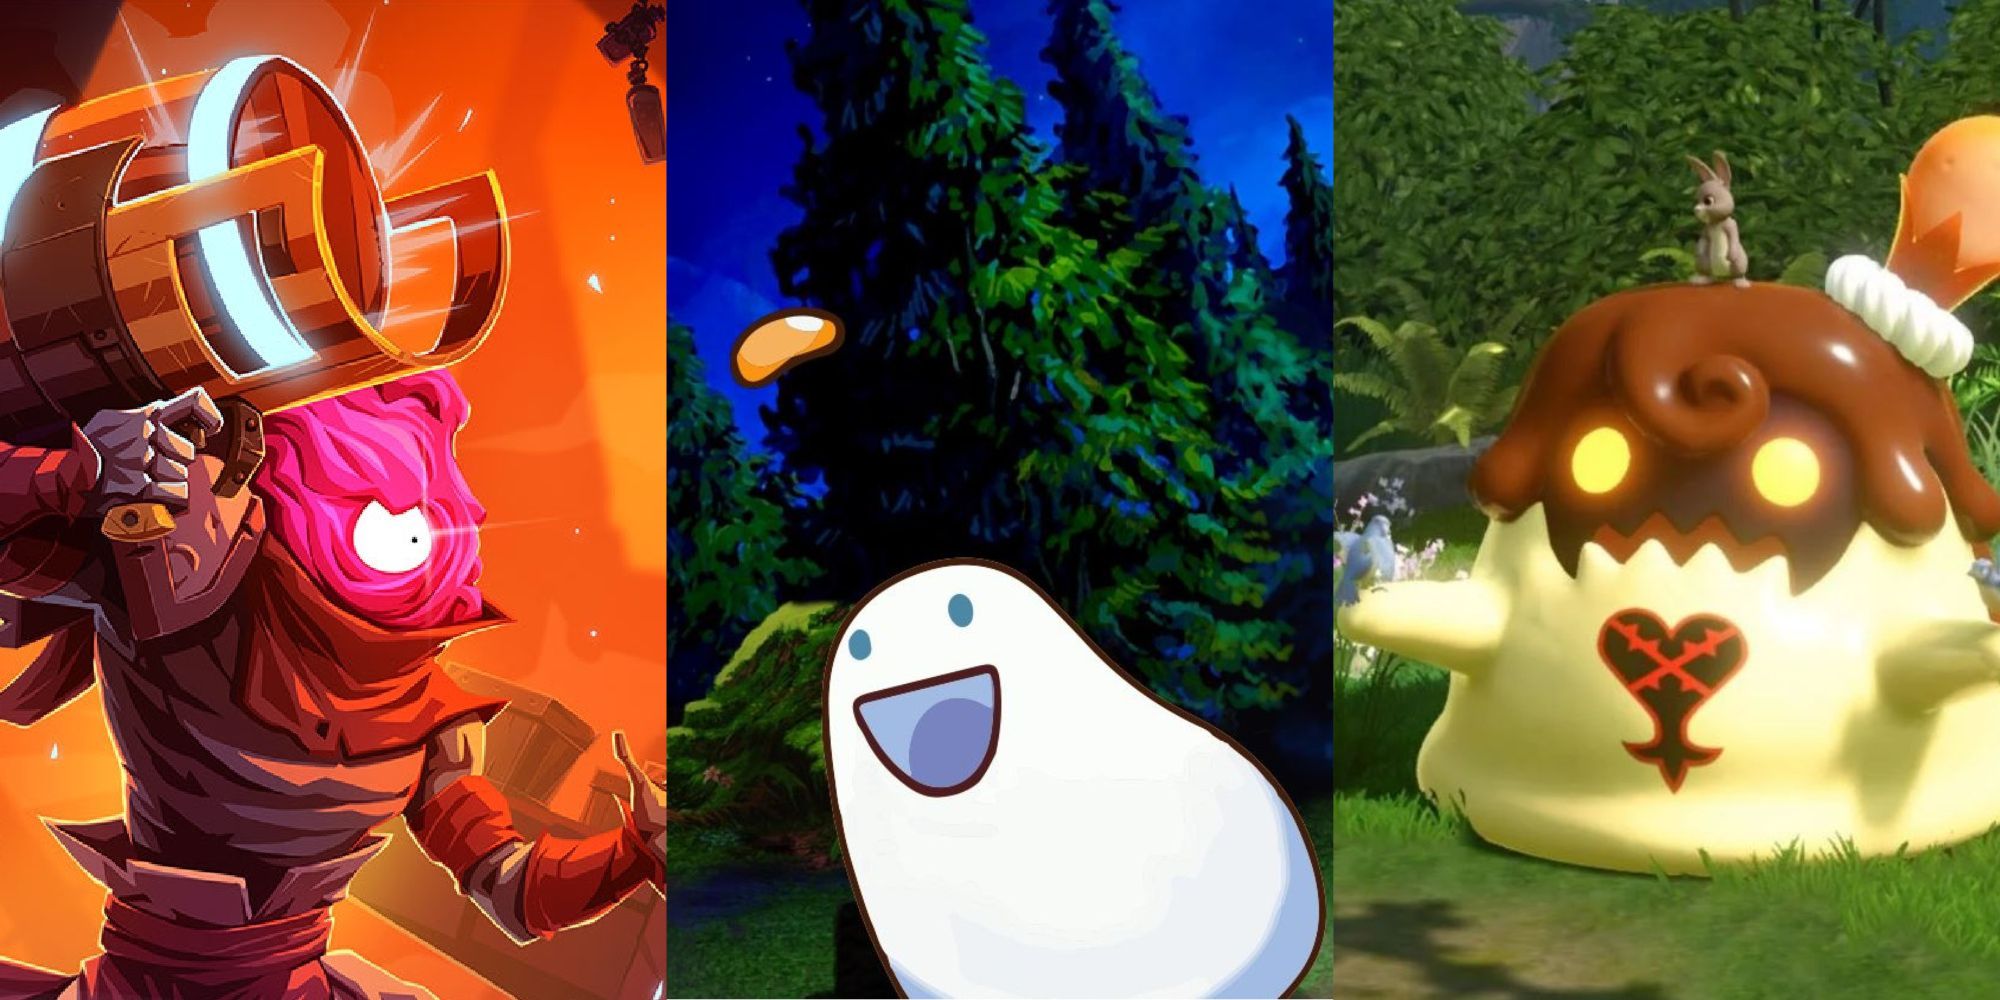 The Beheaded from Dead Cells, Blob from A Boy and his Blob, and Orange Flan from Kingdom Hearts 3